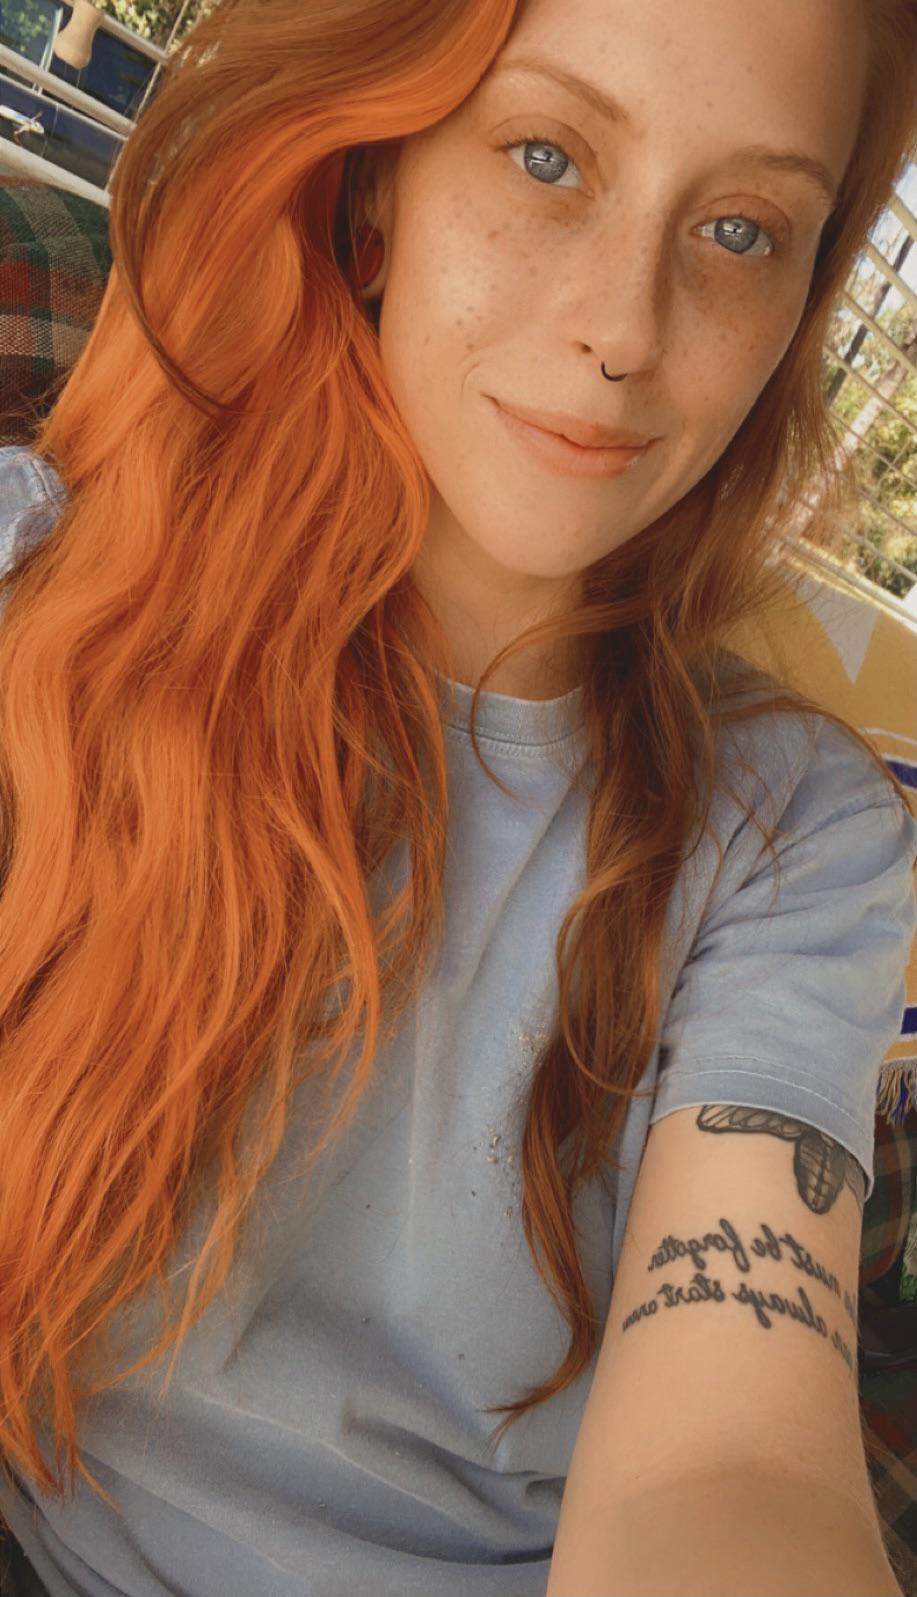 Anybody Have A Love For Tattooed Redheads? 😋